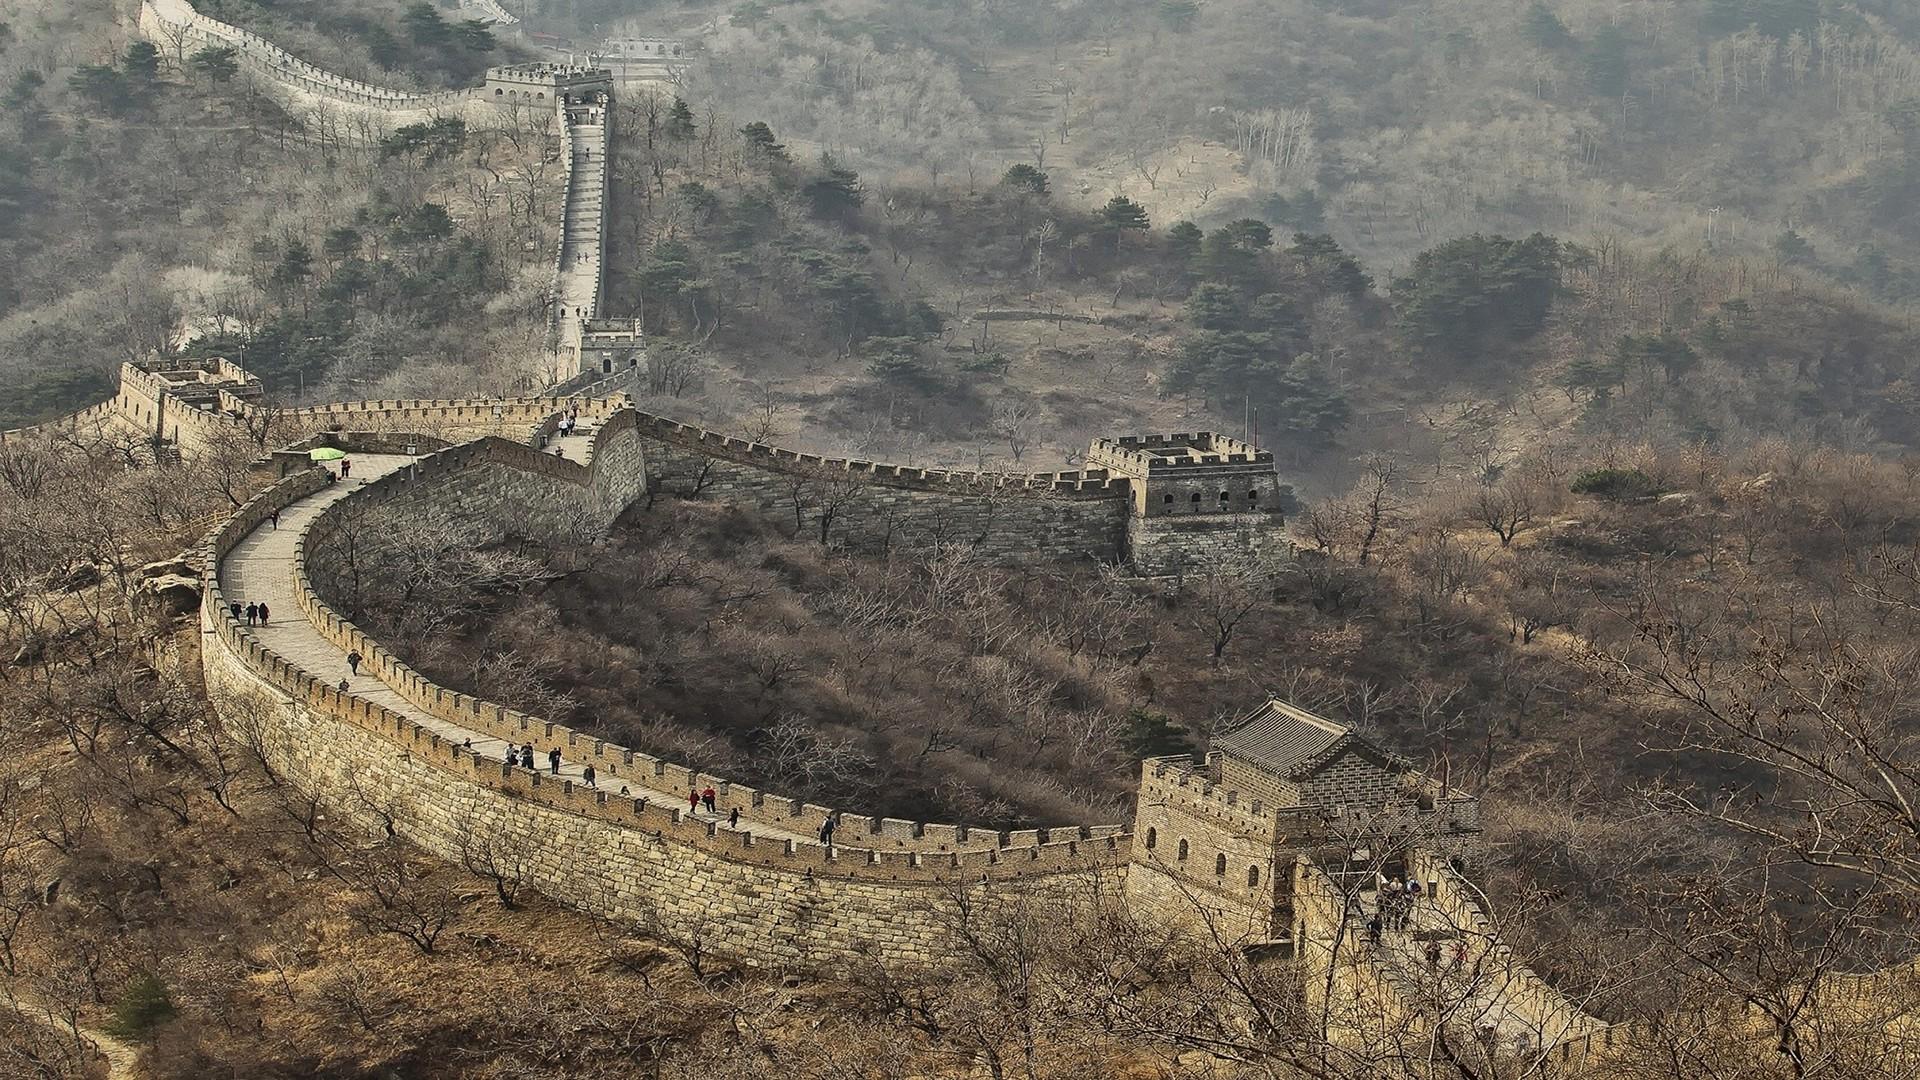 Awesome Great Wall of China Wallpaper 36537